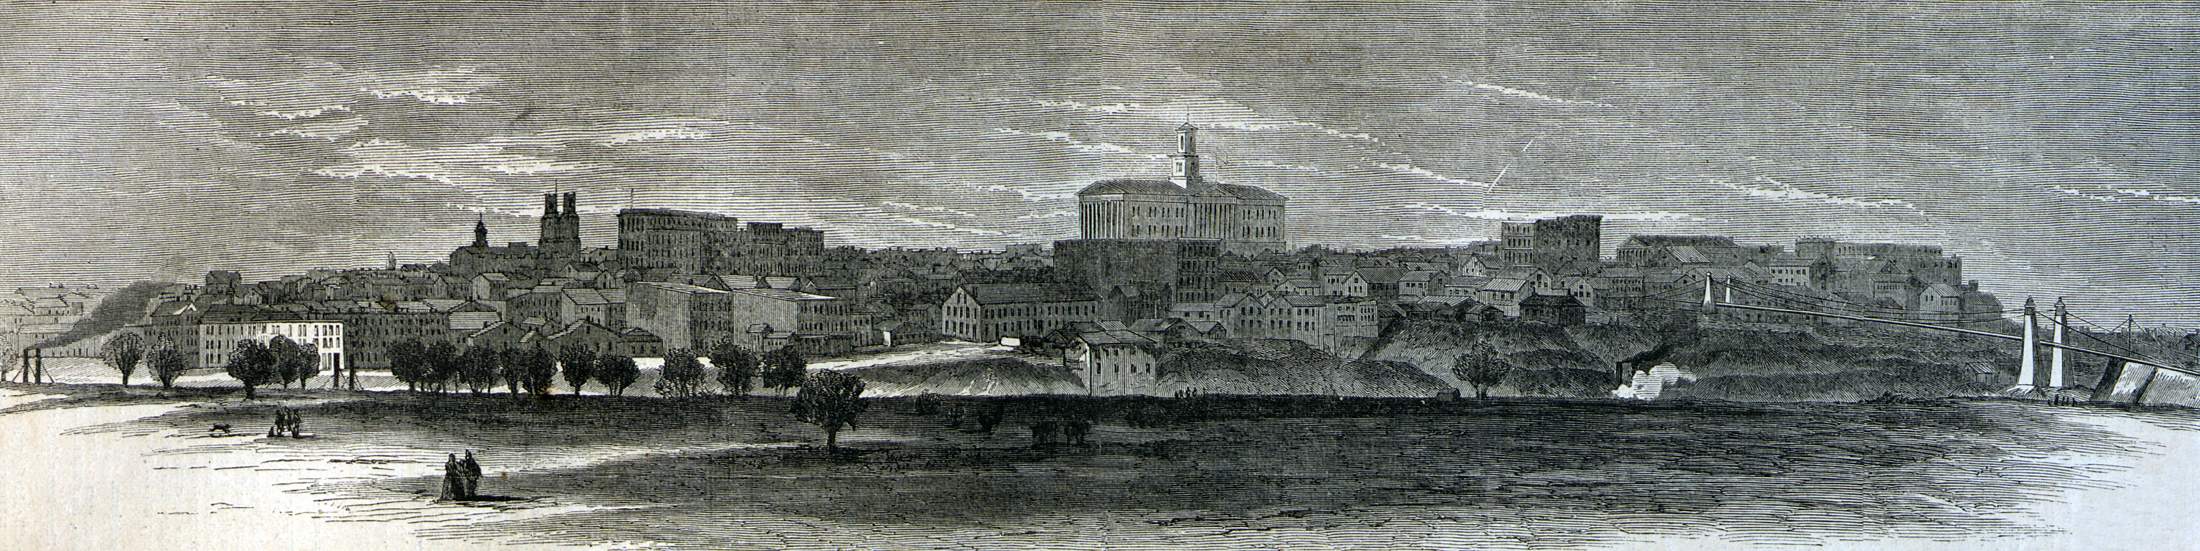 Nashville, Tennessee, May 1866, artist's impression, zoomable image